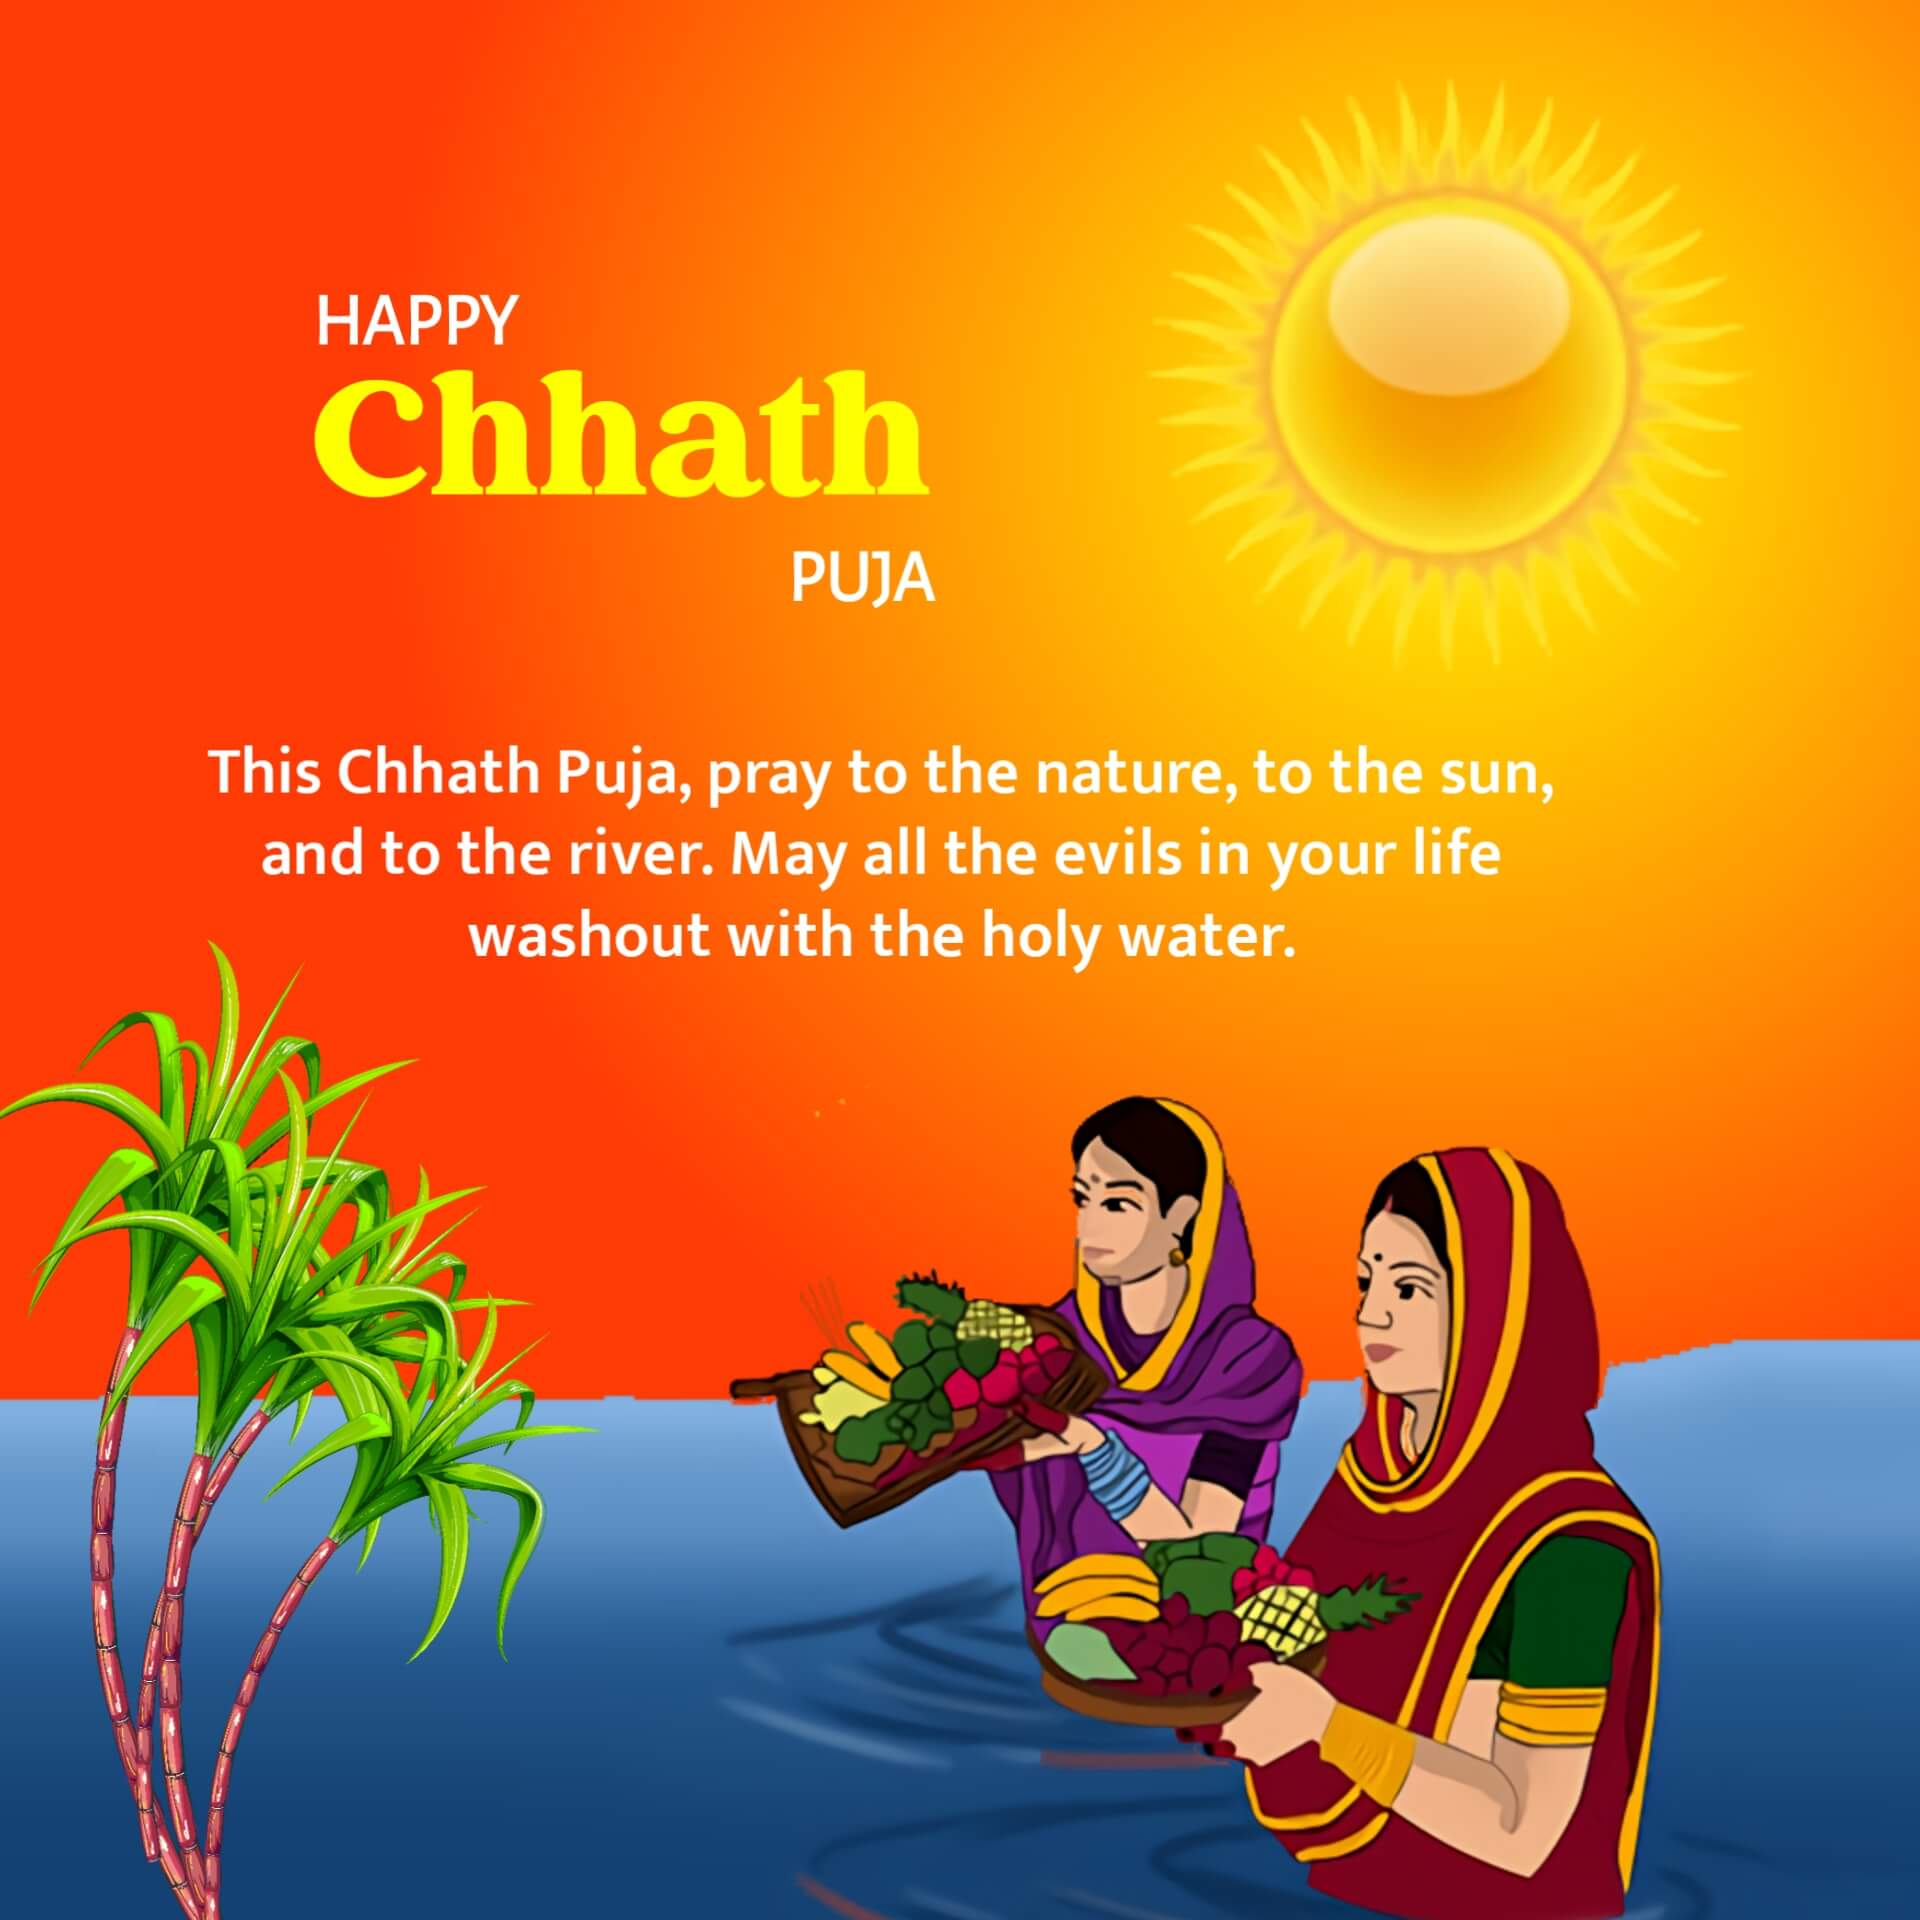 Happy Chhath Puja Wishes Image in English